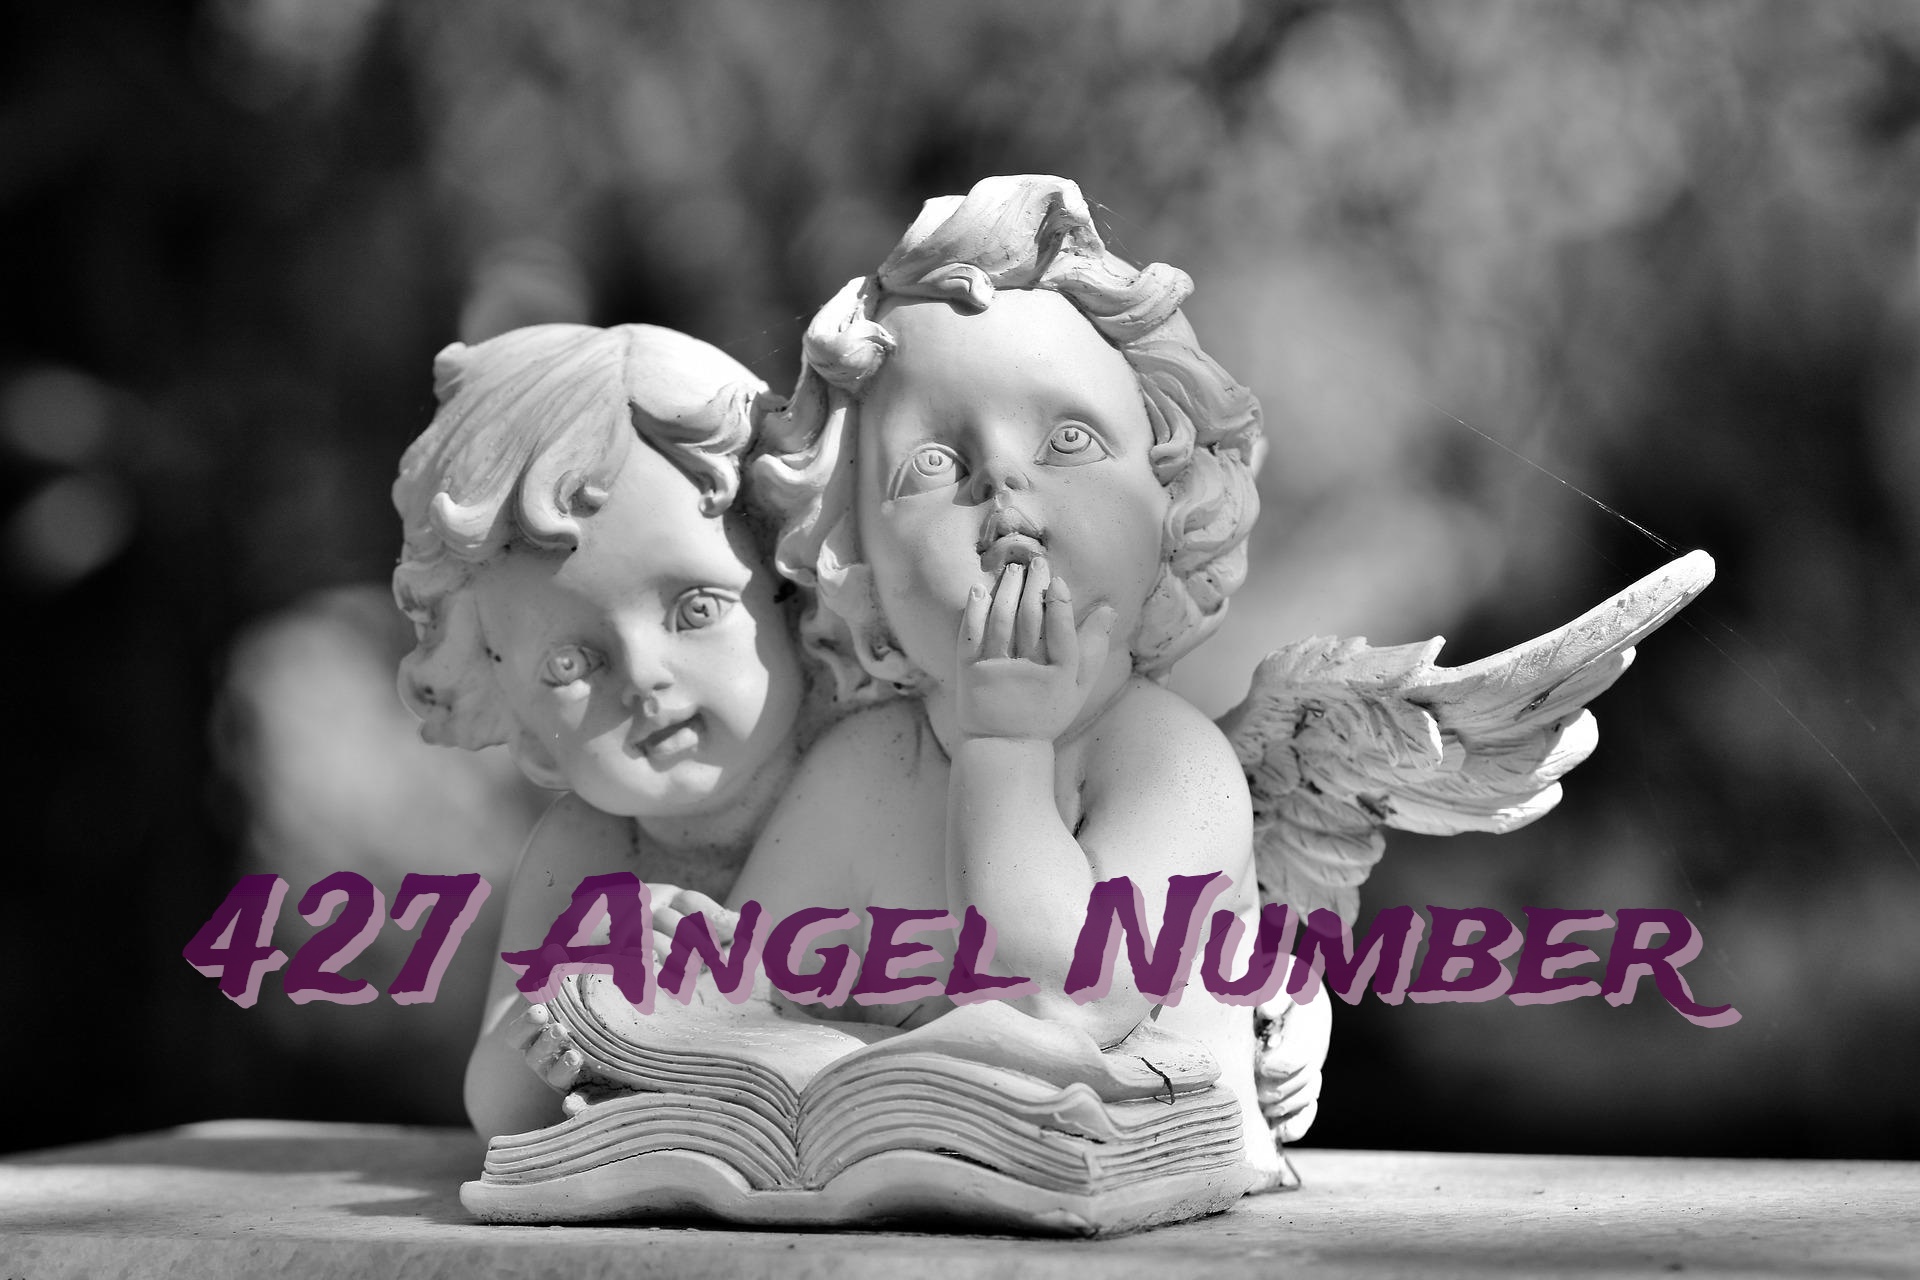 427 Angel Number - Meaning & Symbolism In Numerology